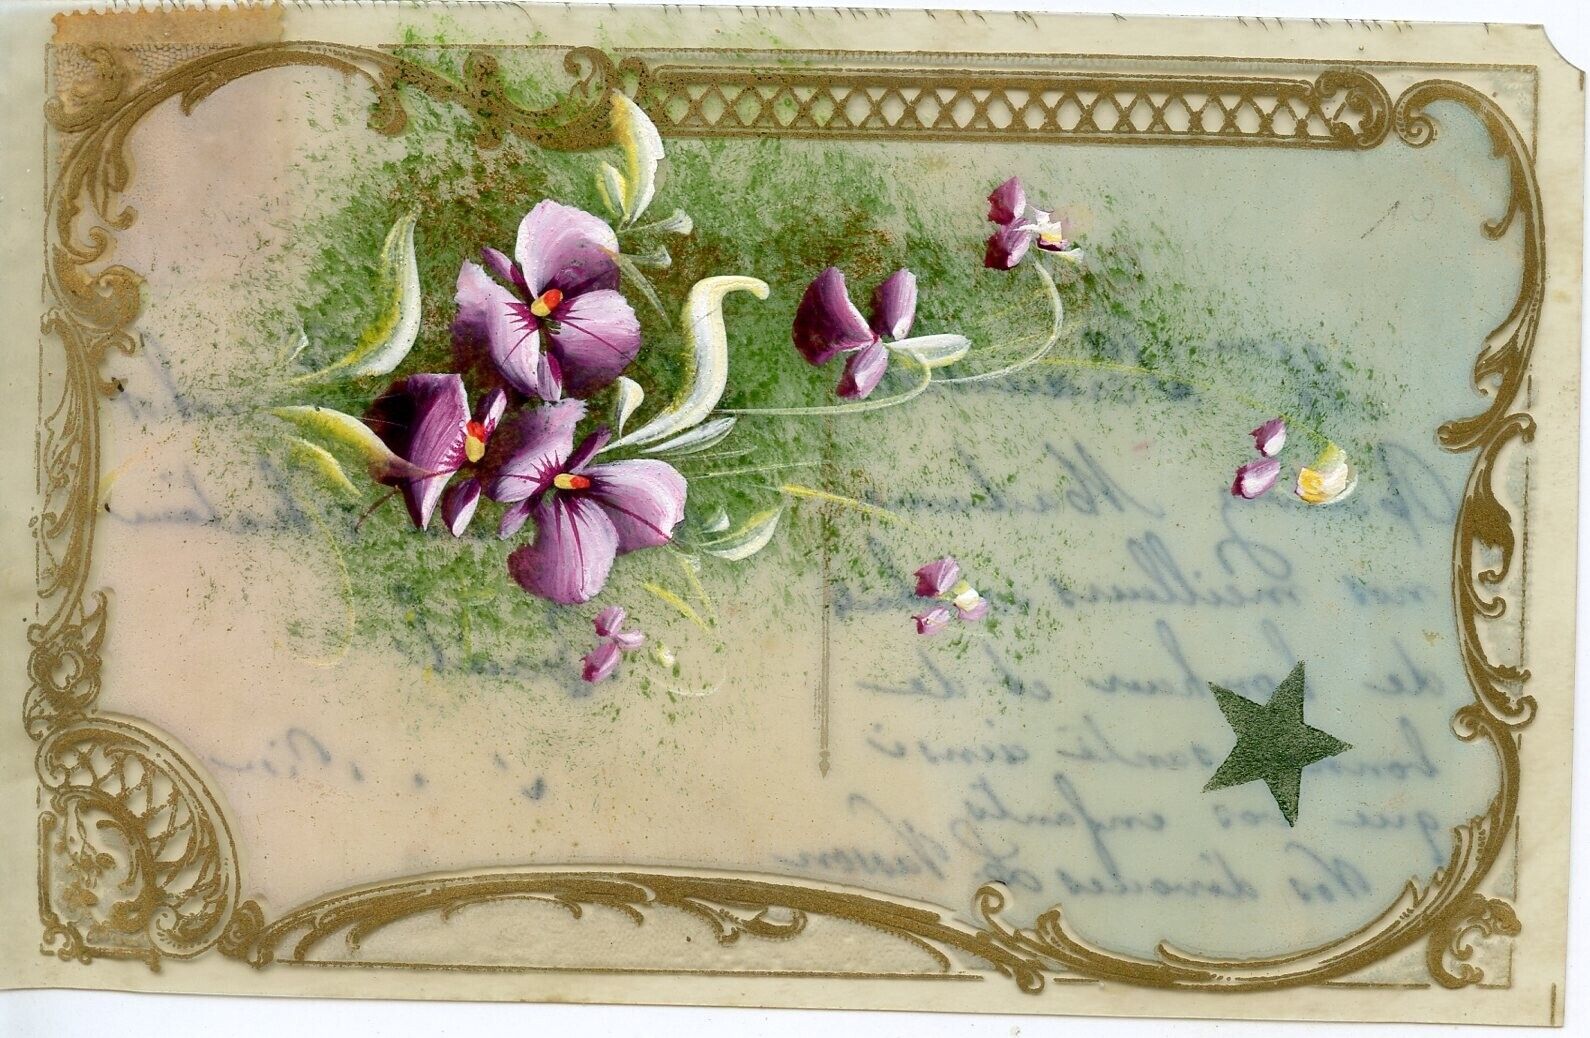 CPA / POSTCARD / FANTASY / CELLULOID / FLOWERS / FLORA / PAINTED